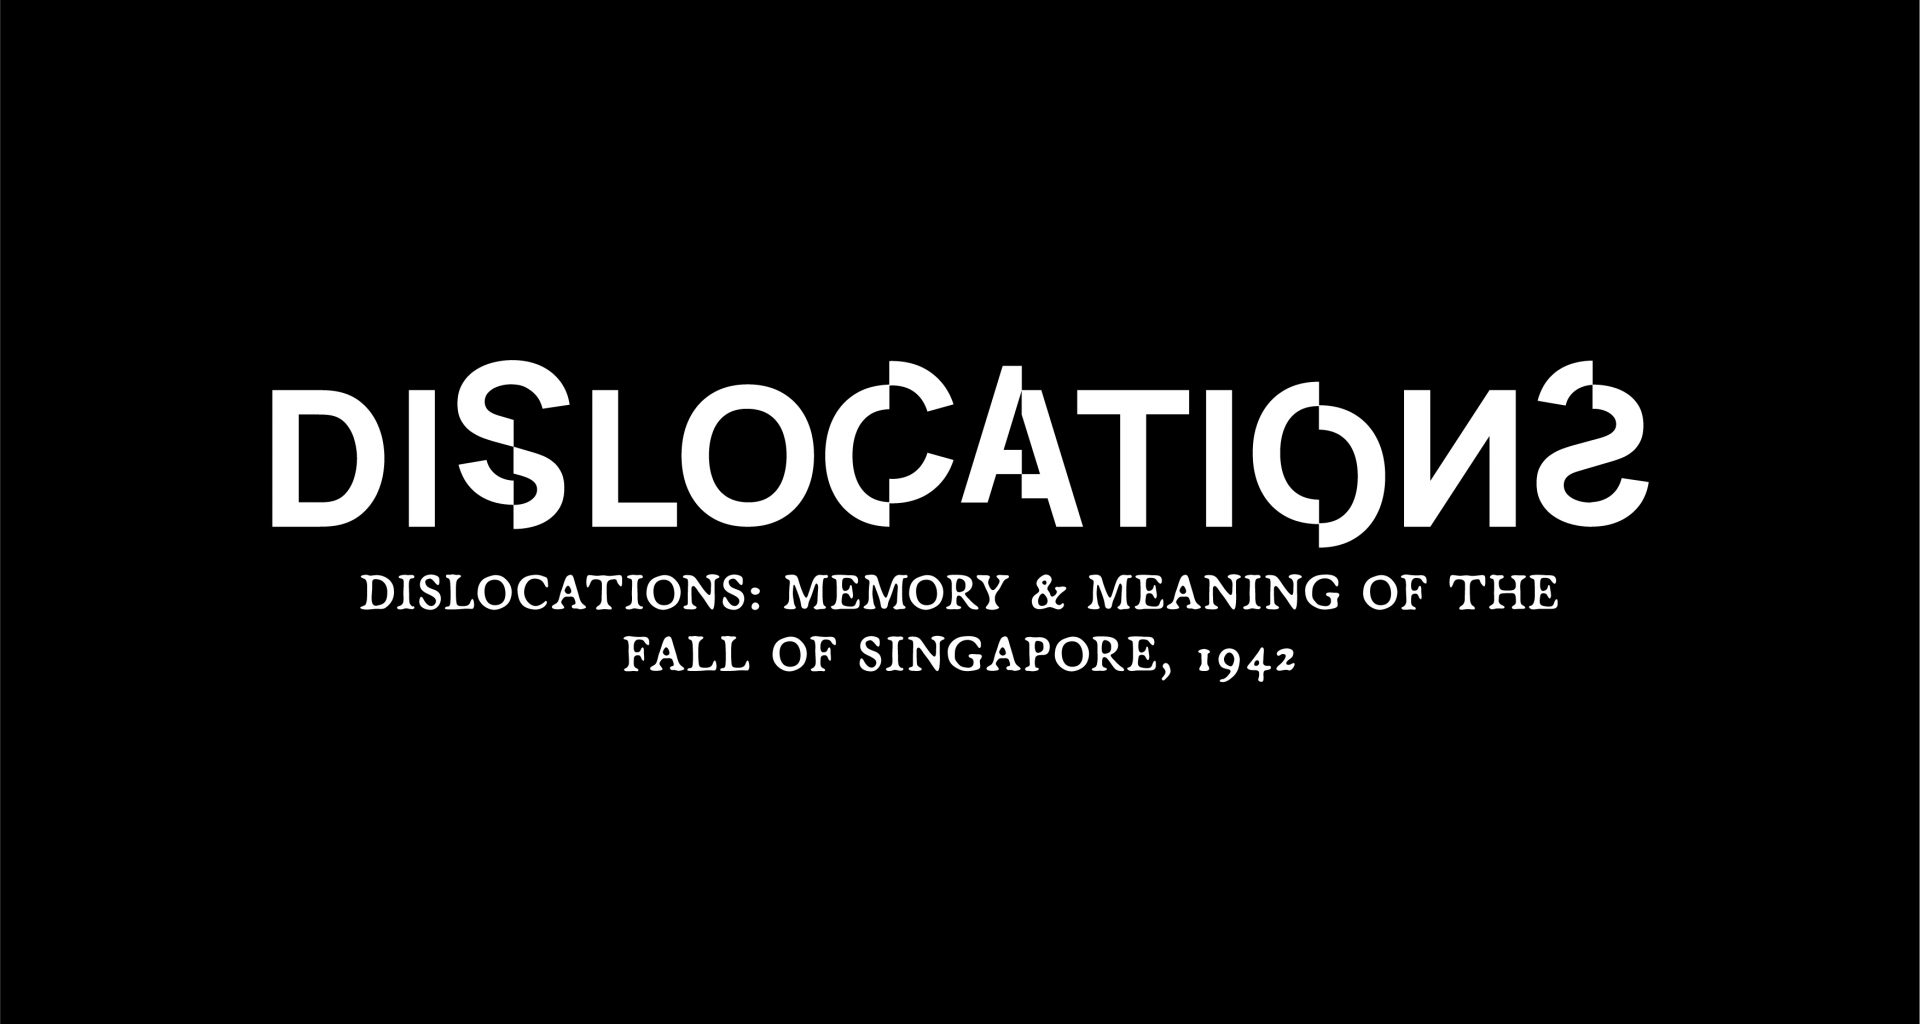 National Museum Singapore launches new exhibition to commemorate the 80th anniversary of the Fall of Singapore - Alvinology